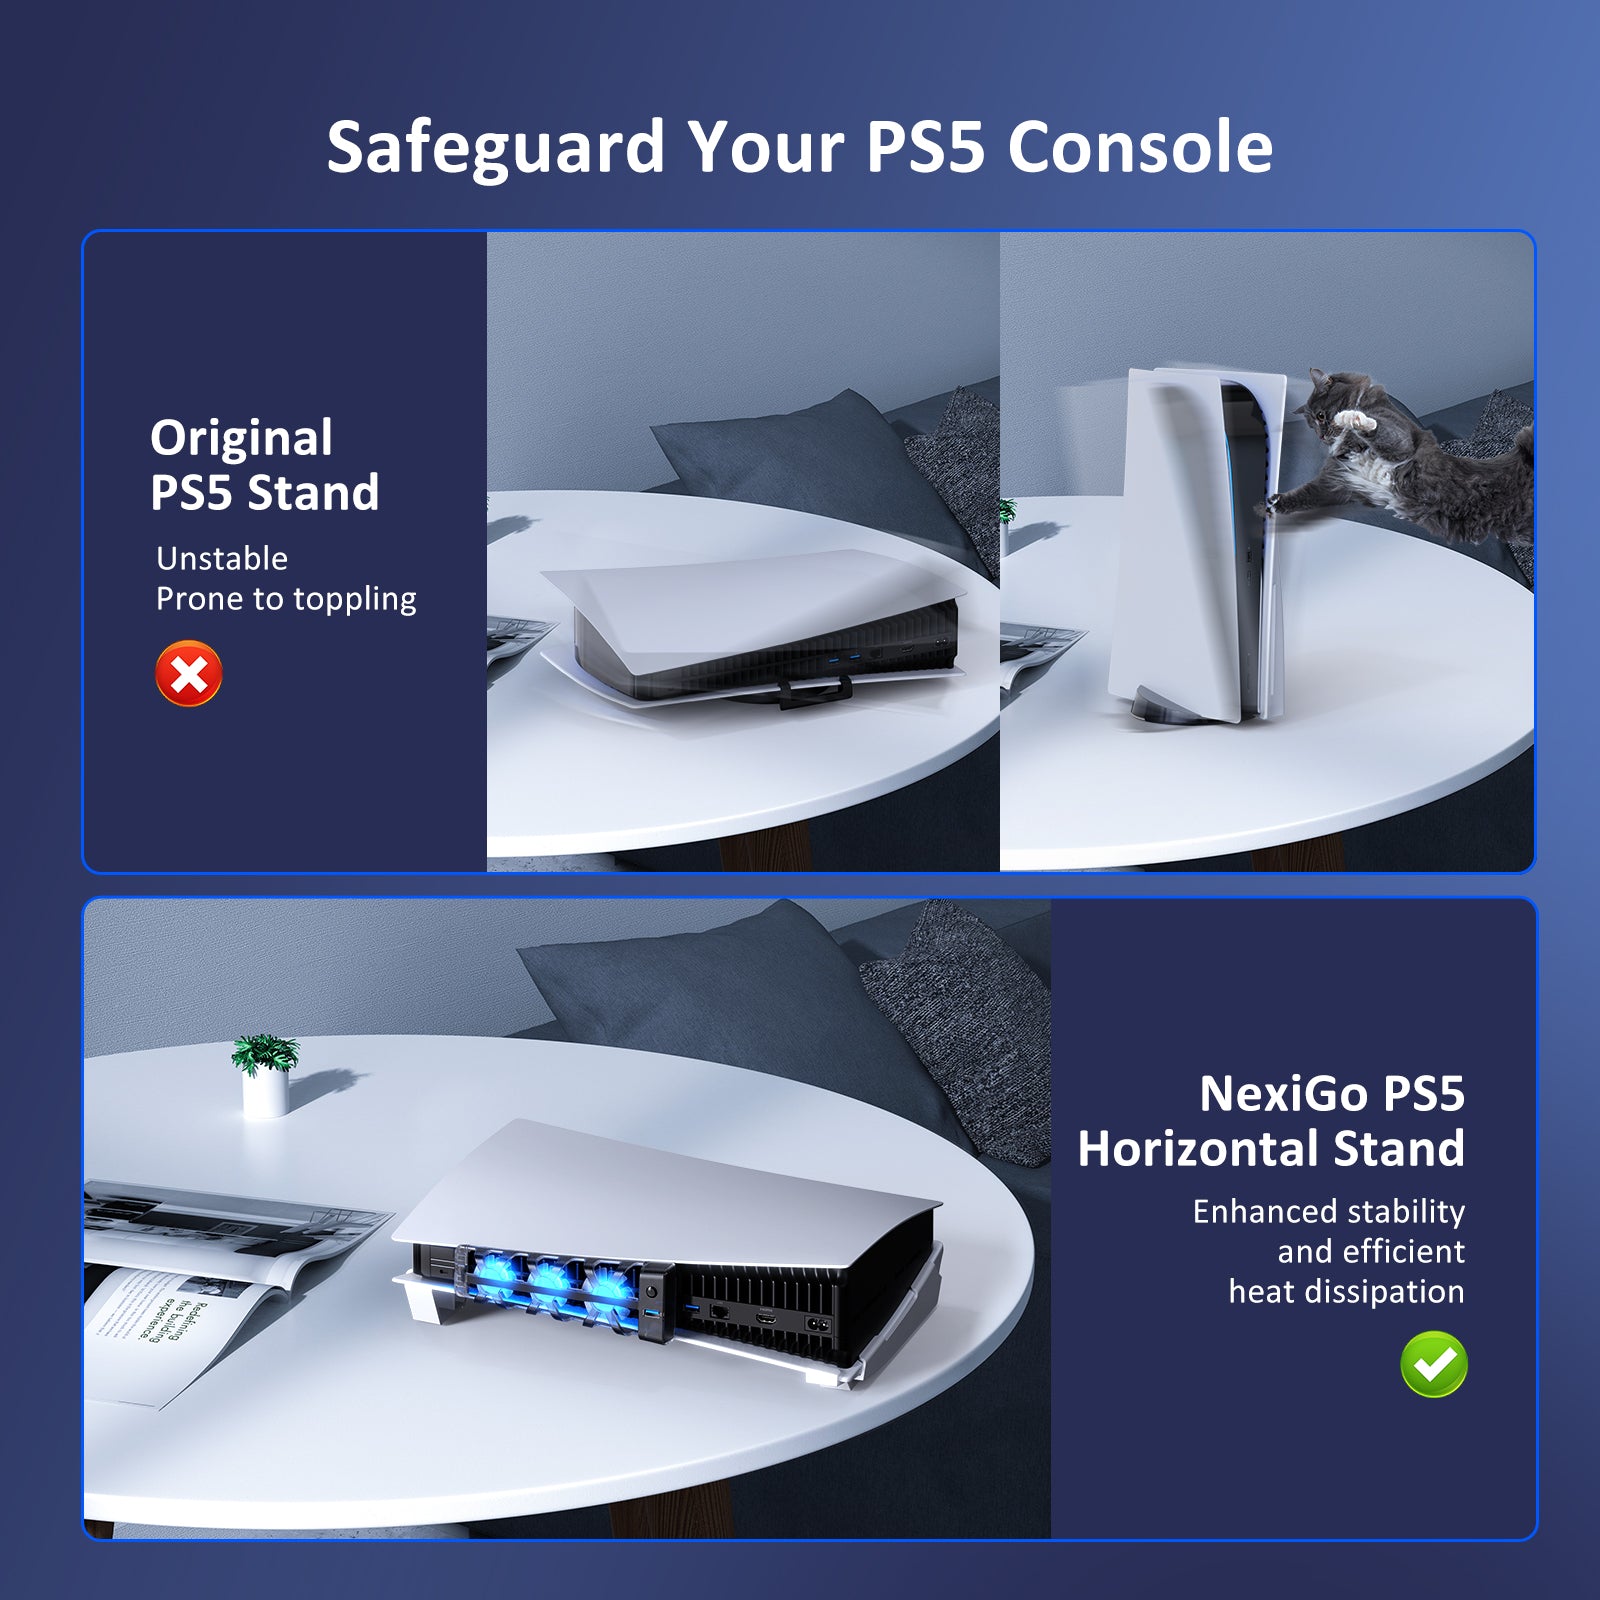 PS5 horizontal stand keeps console stable horizontally, safeguarding against cat mishaps. 